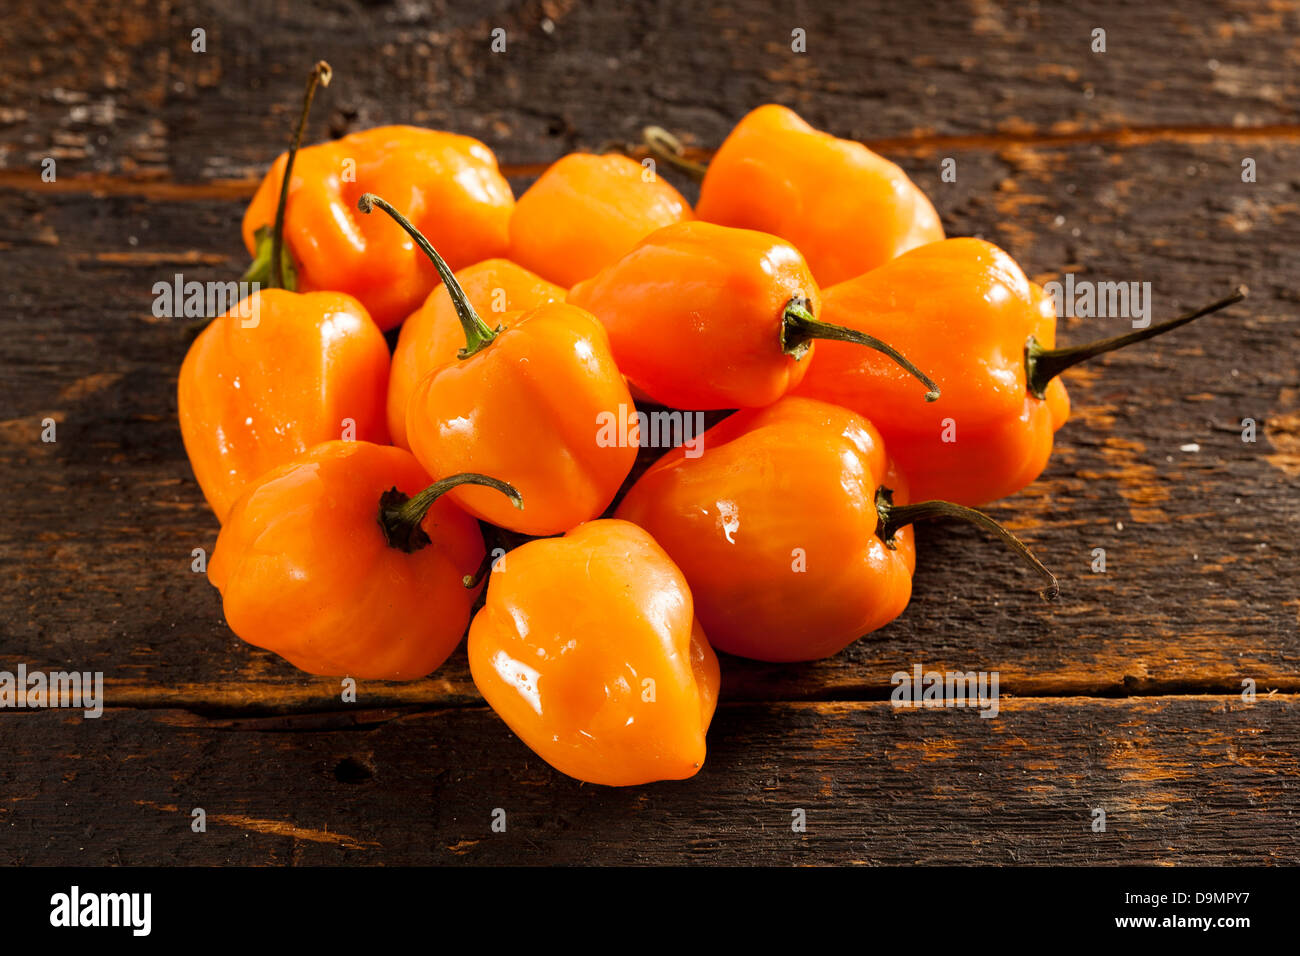 Organic Hot and Spicy Habanero Peppers against a background Stock Photo